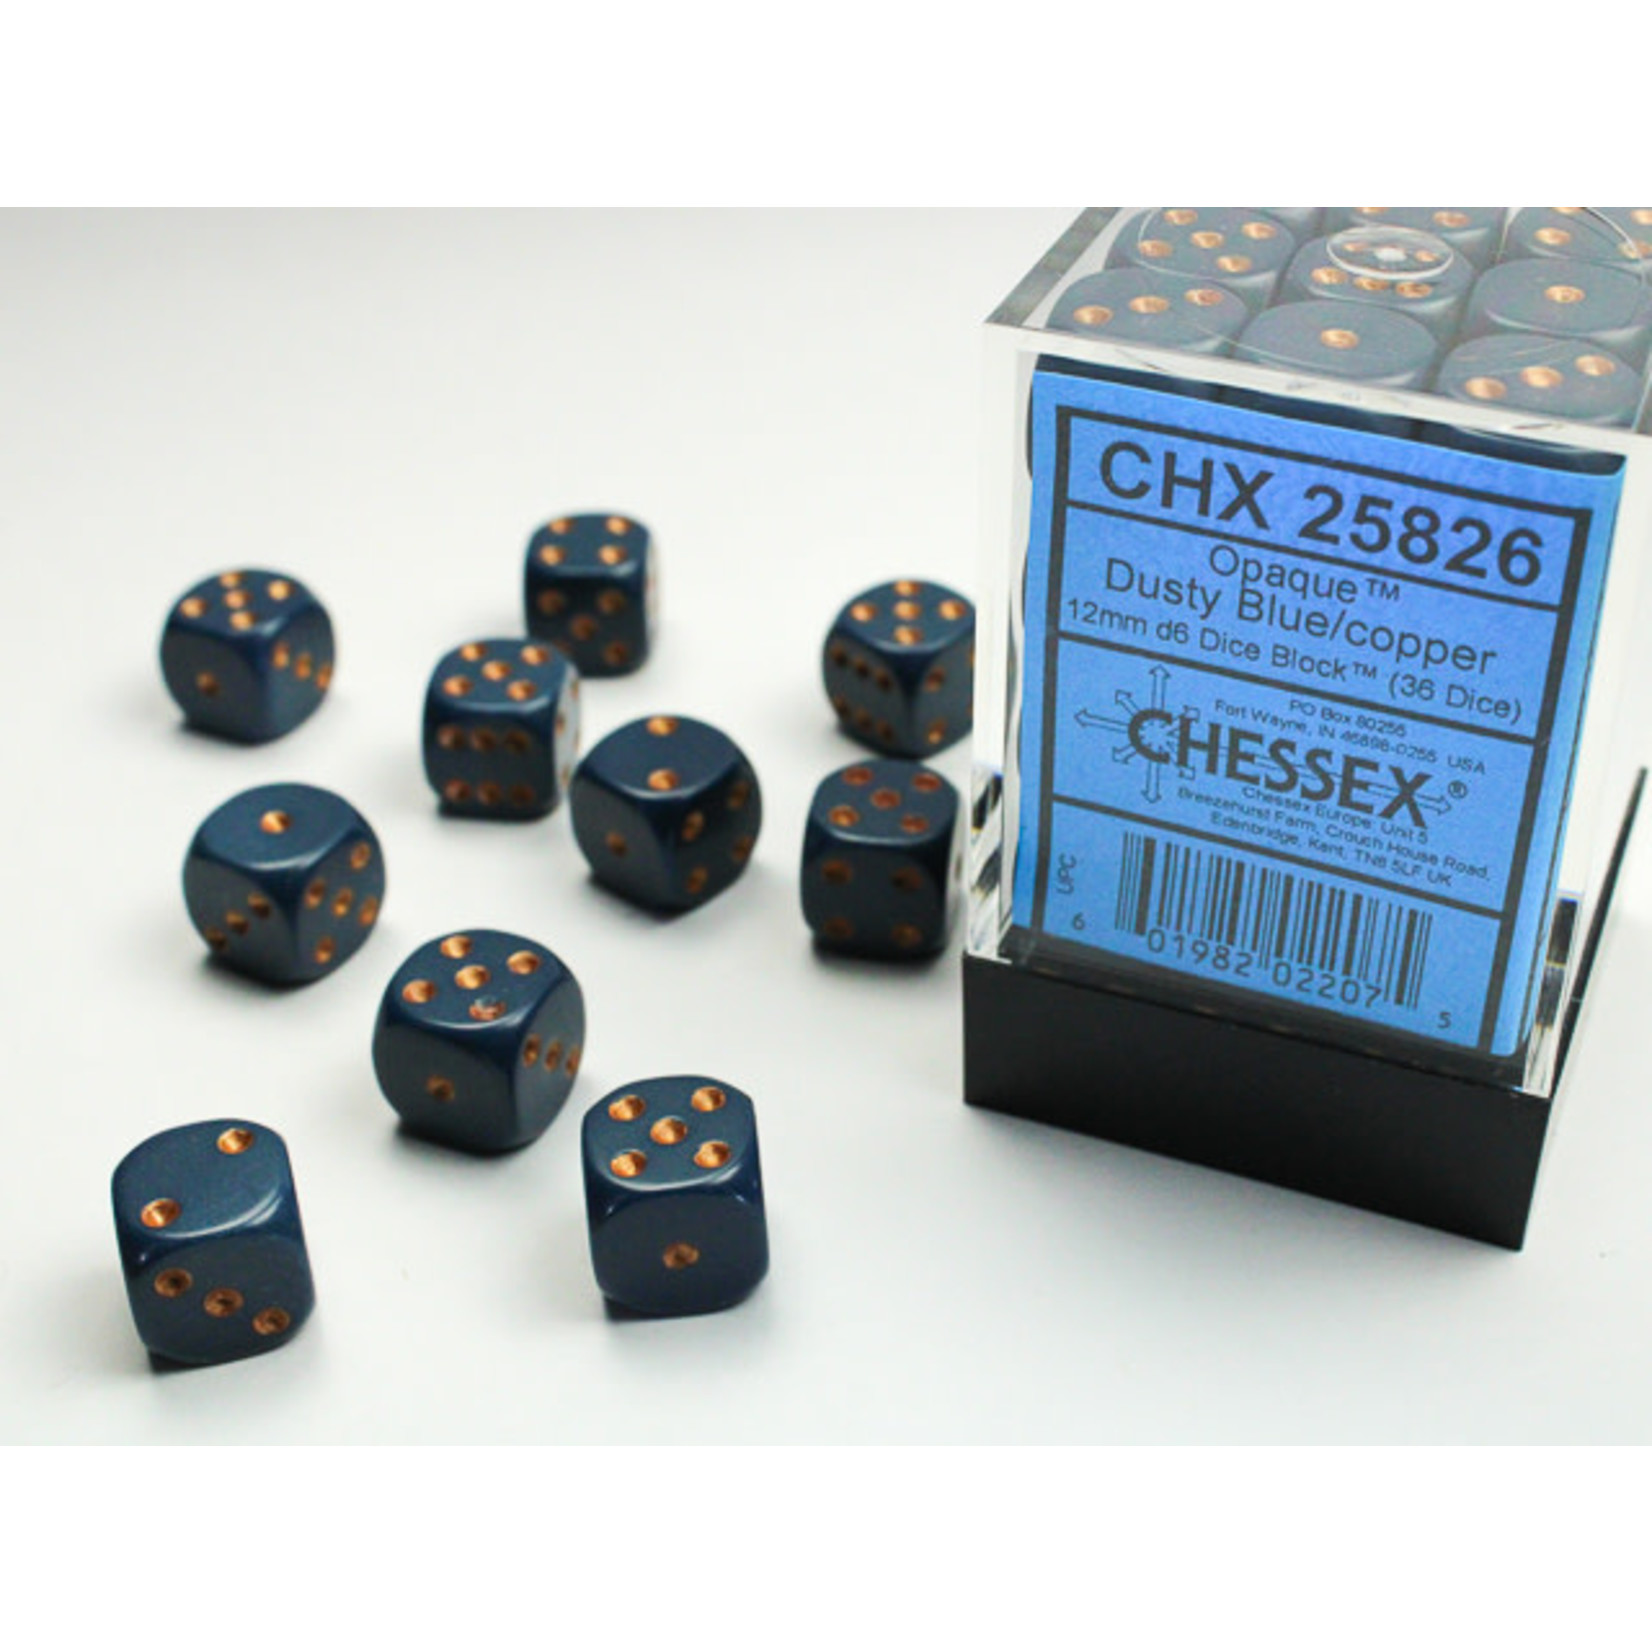 Chessex 25826 Opaque 36pc Dusty Blue/Copper Dice